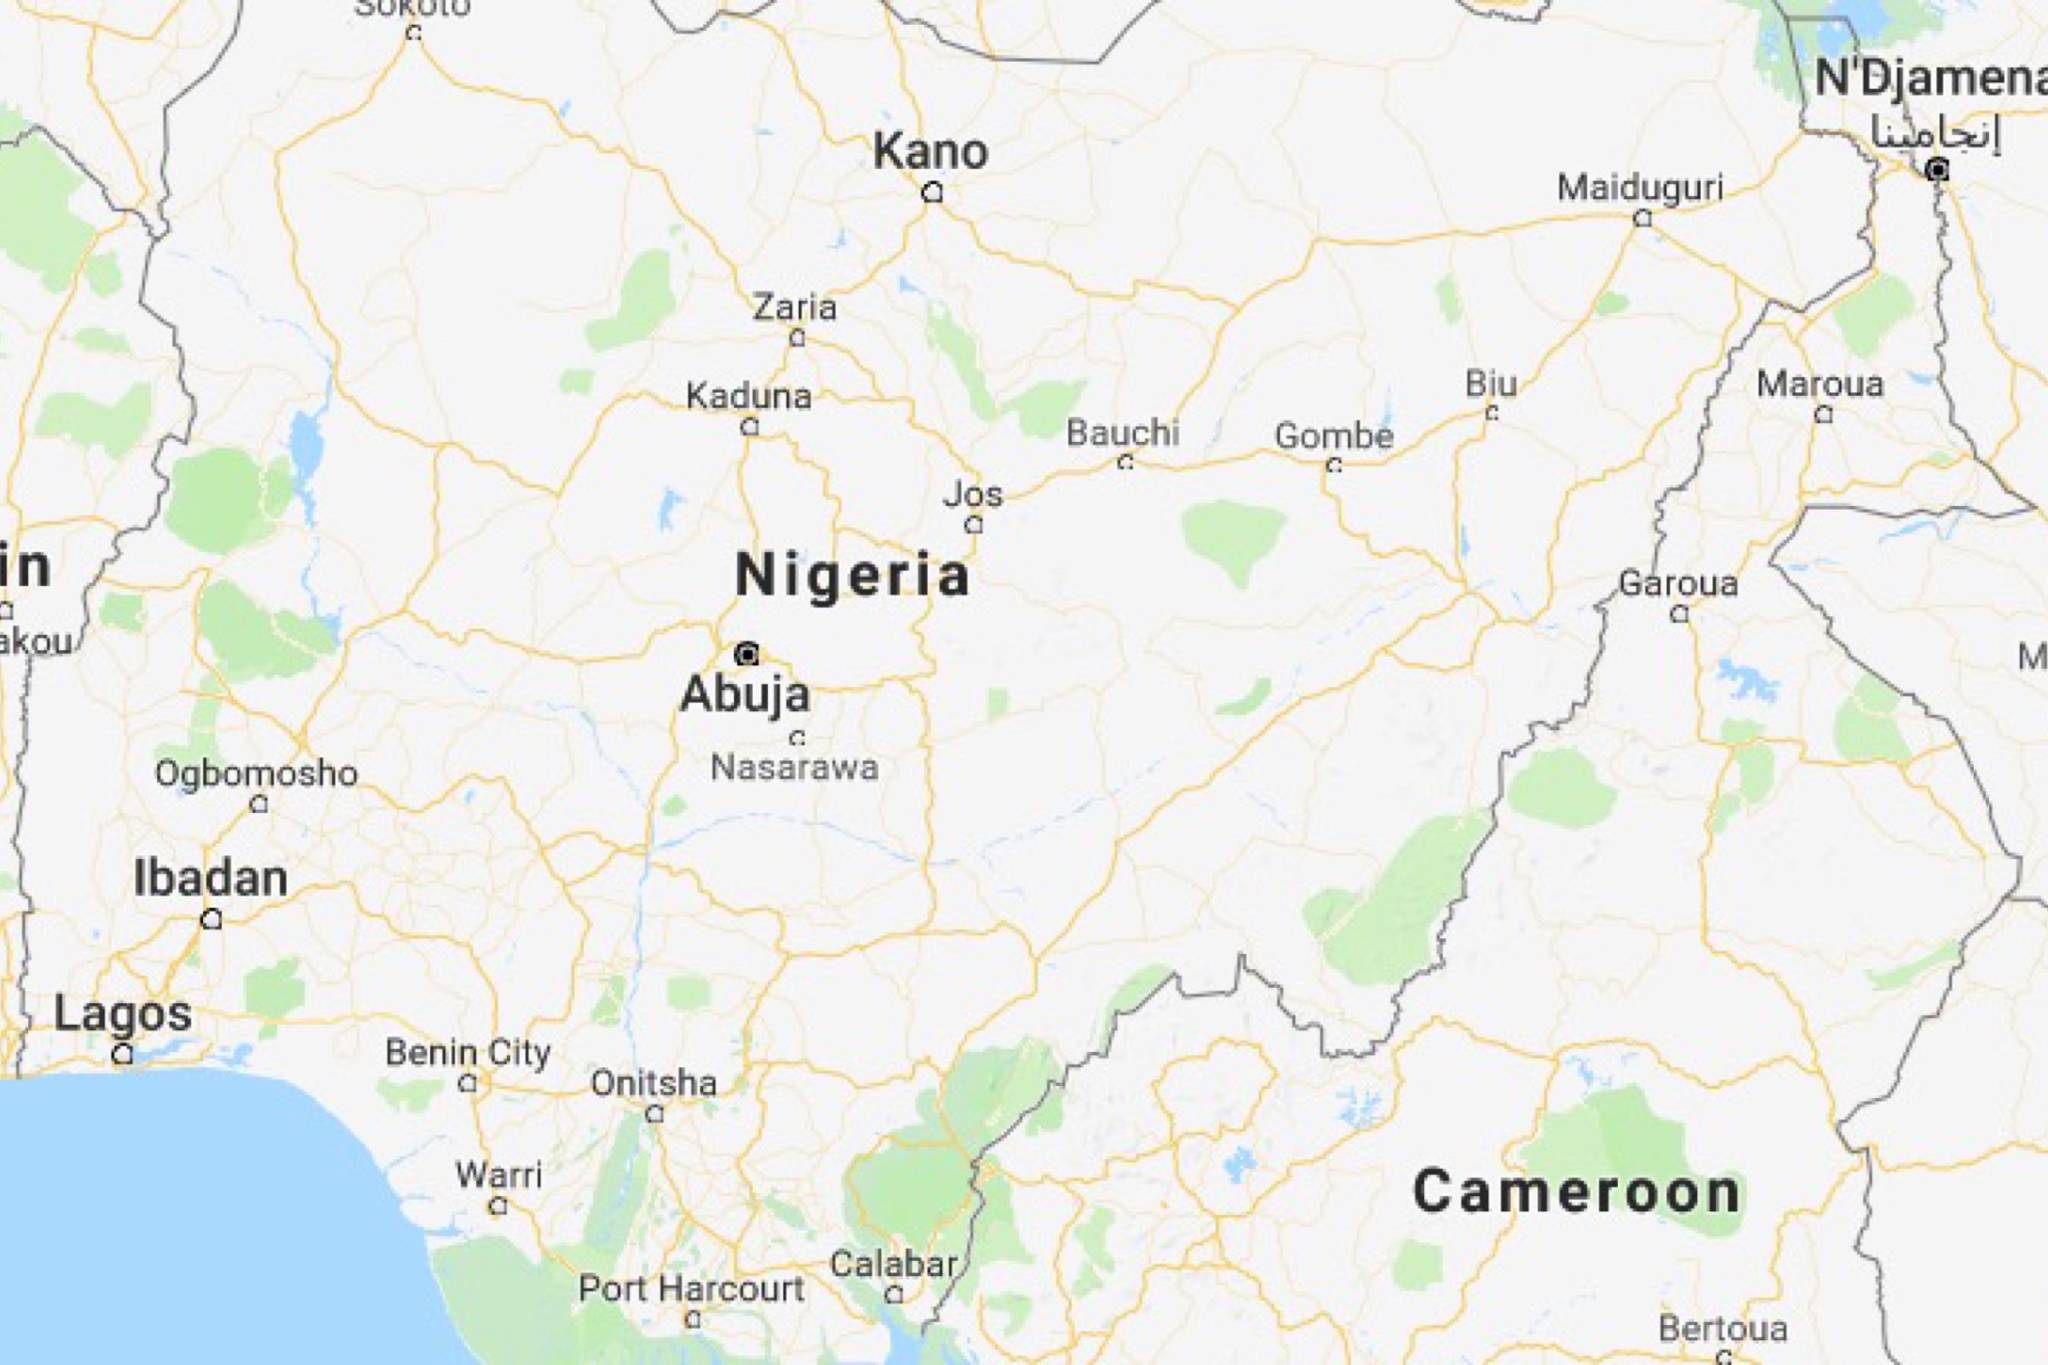 Two Canadians, two Americans abducted in Nigeria are freed